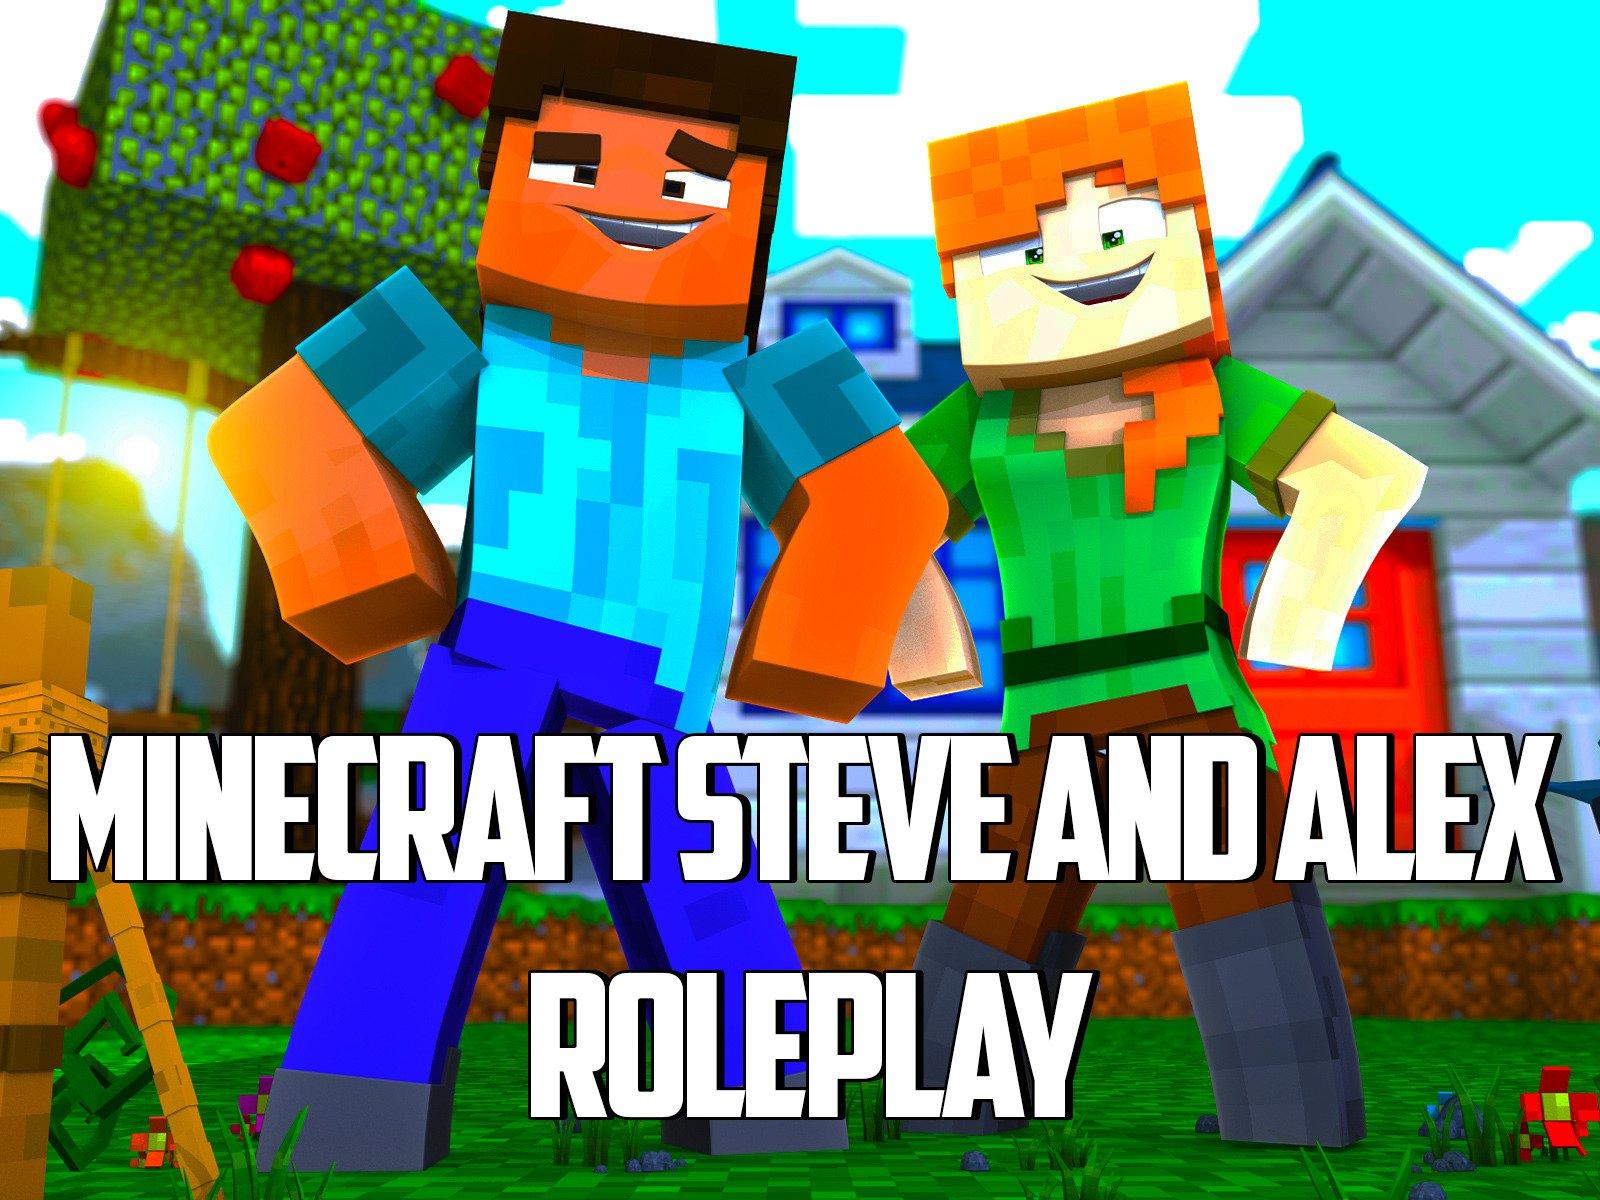 alex and steve in minecraft